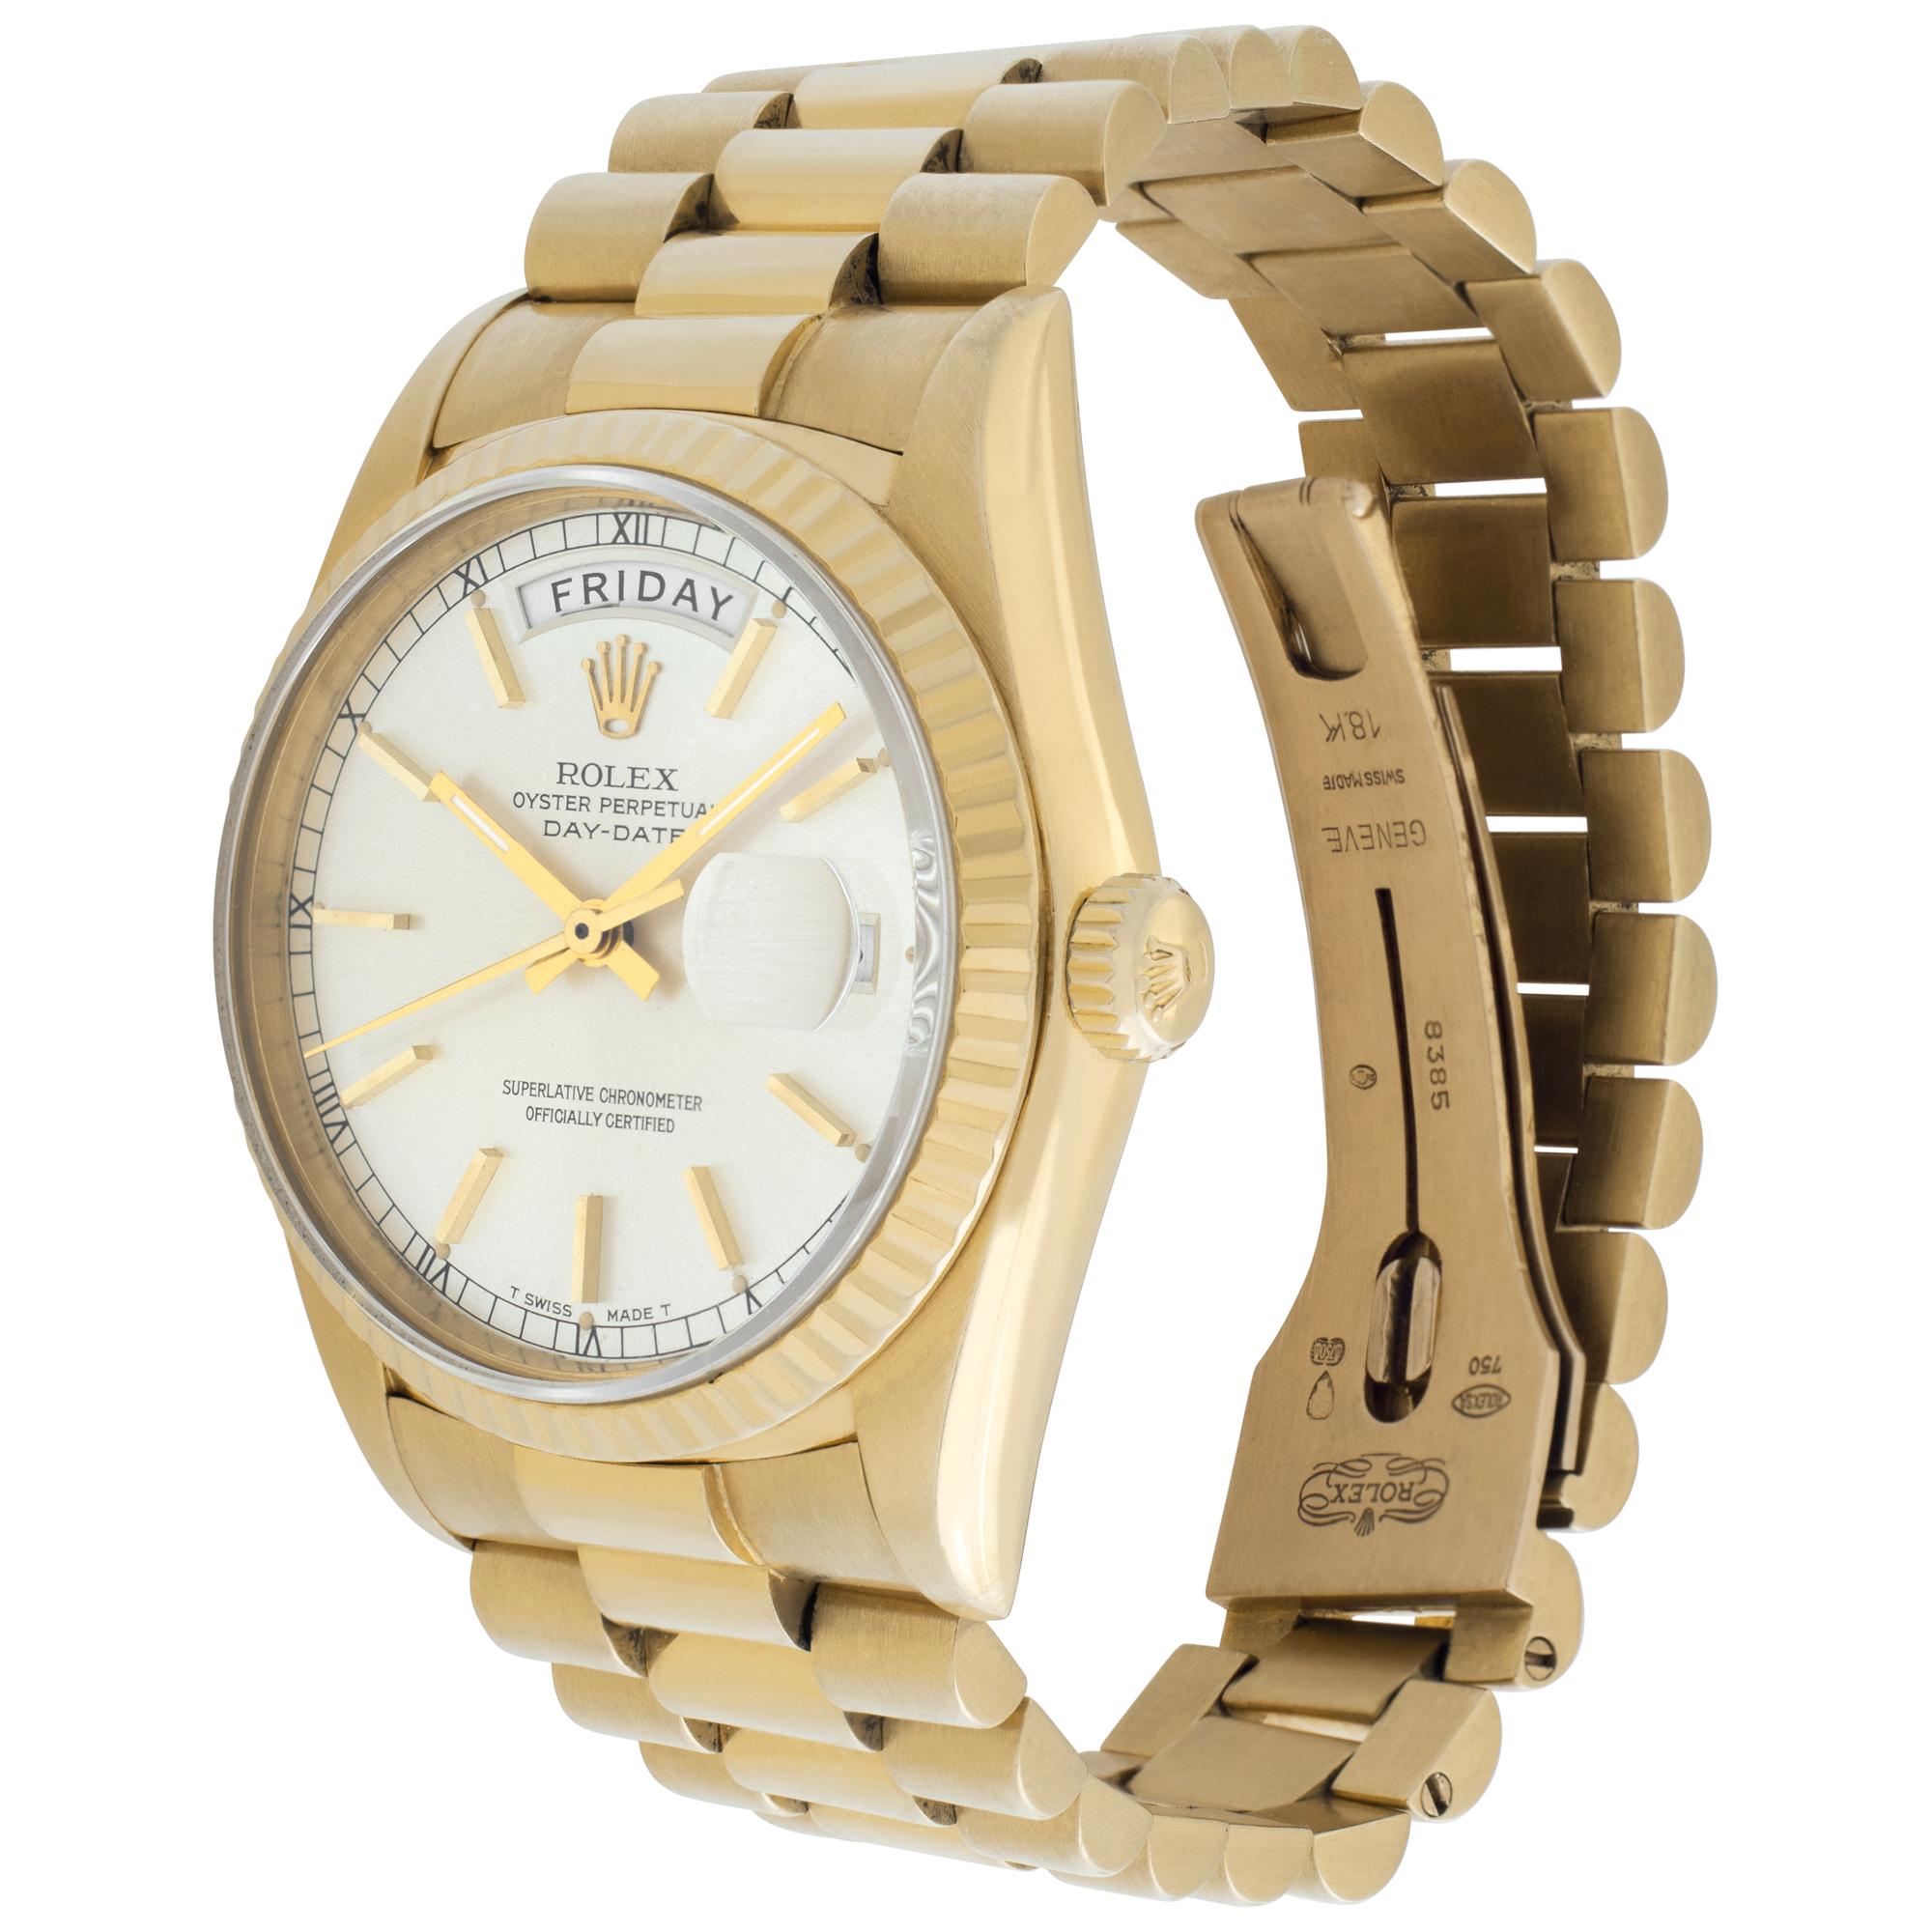 Rolex Day-Date in 18k yellow gold with soft champane stick dial. Auto w/ sweep seconds, date and day. 36 mm case size. Ref 18038. **Bank wire only at this price** Circa 1985. Fine Pre-owned Rolex Watch. Certified preowned Dress Rolex Day-Date 18038